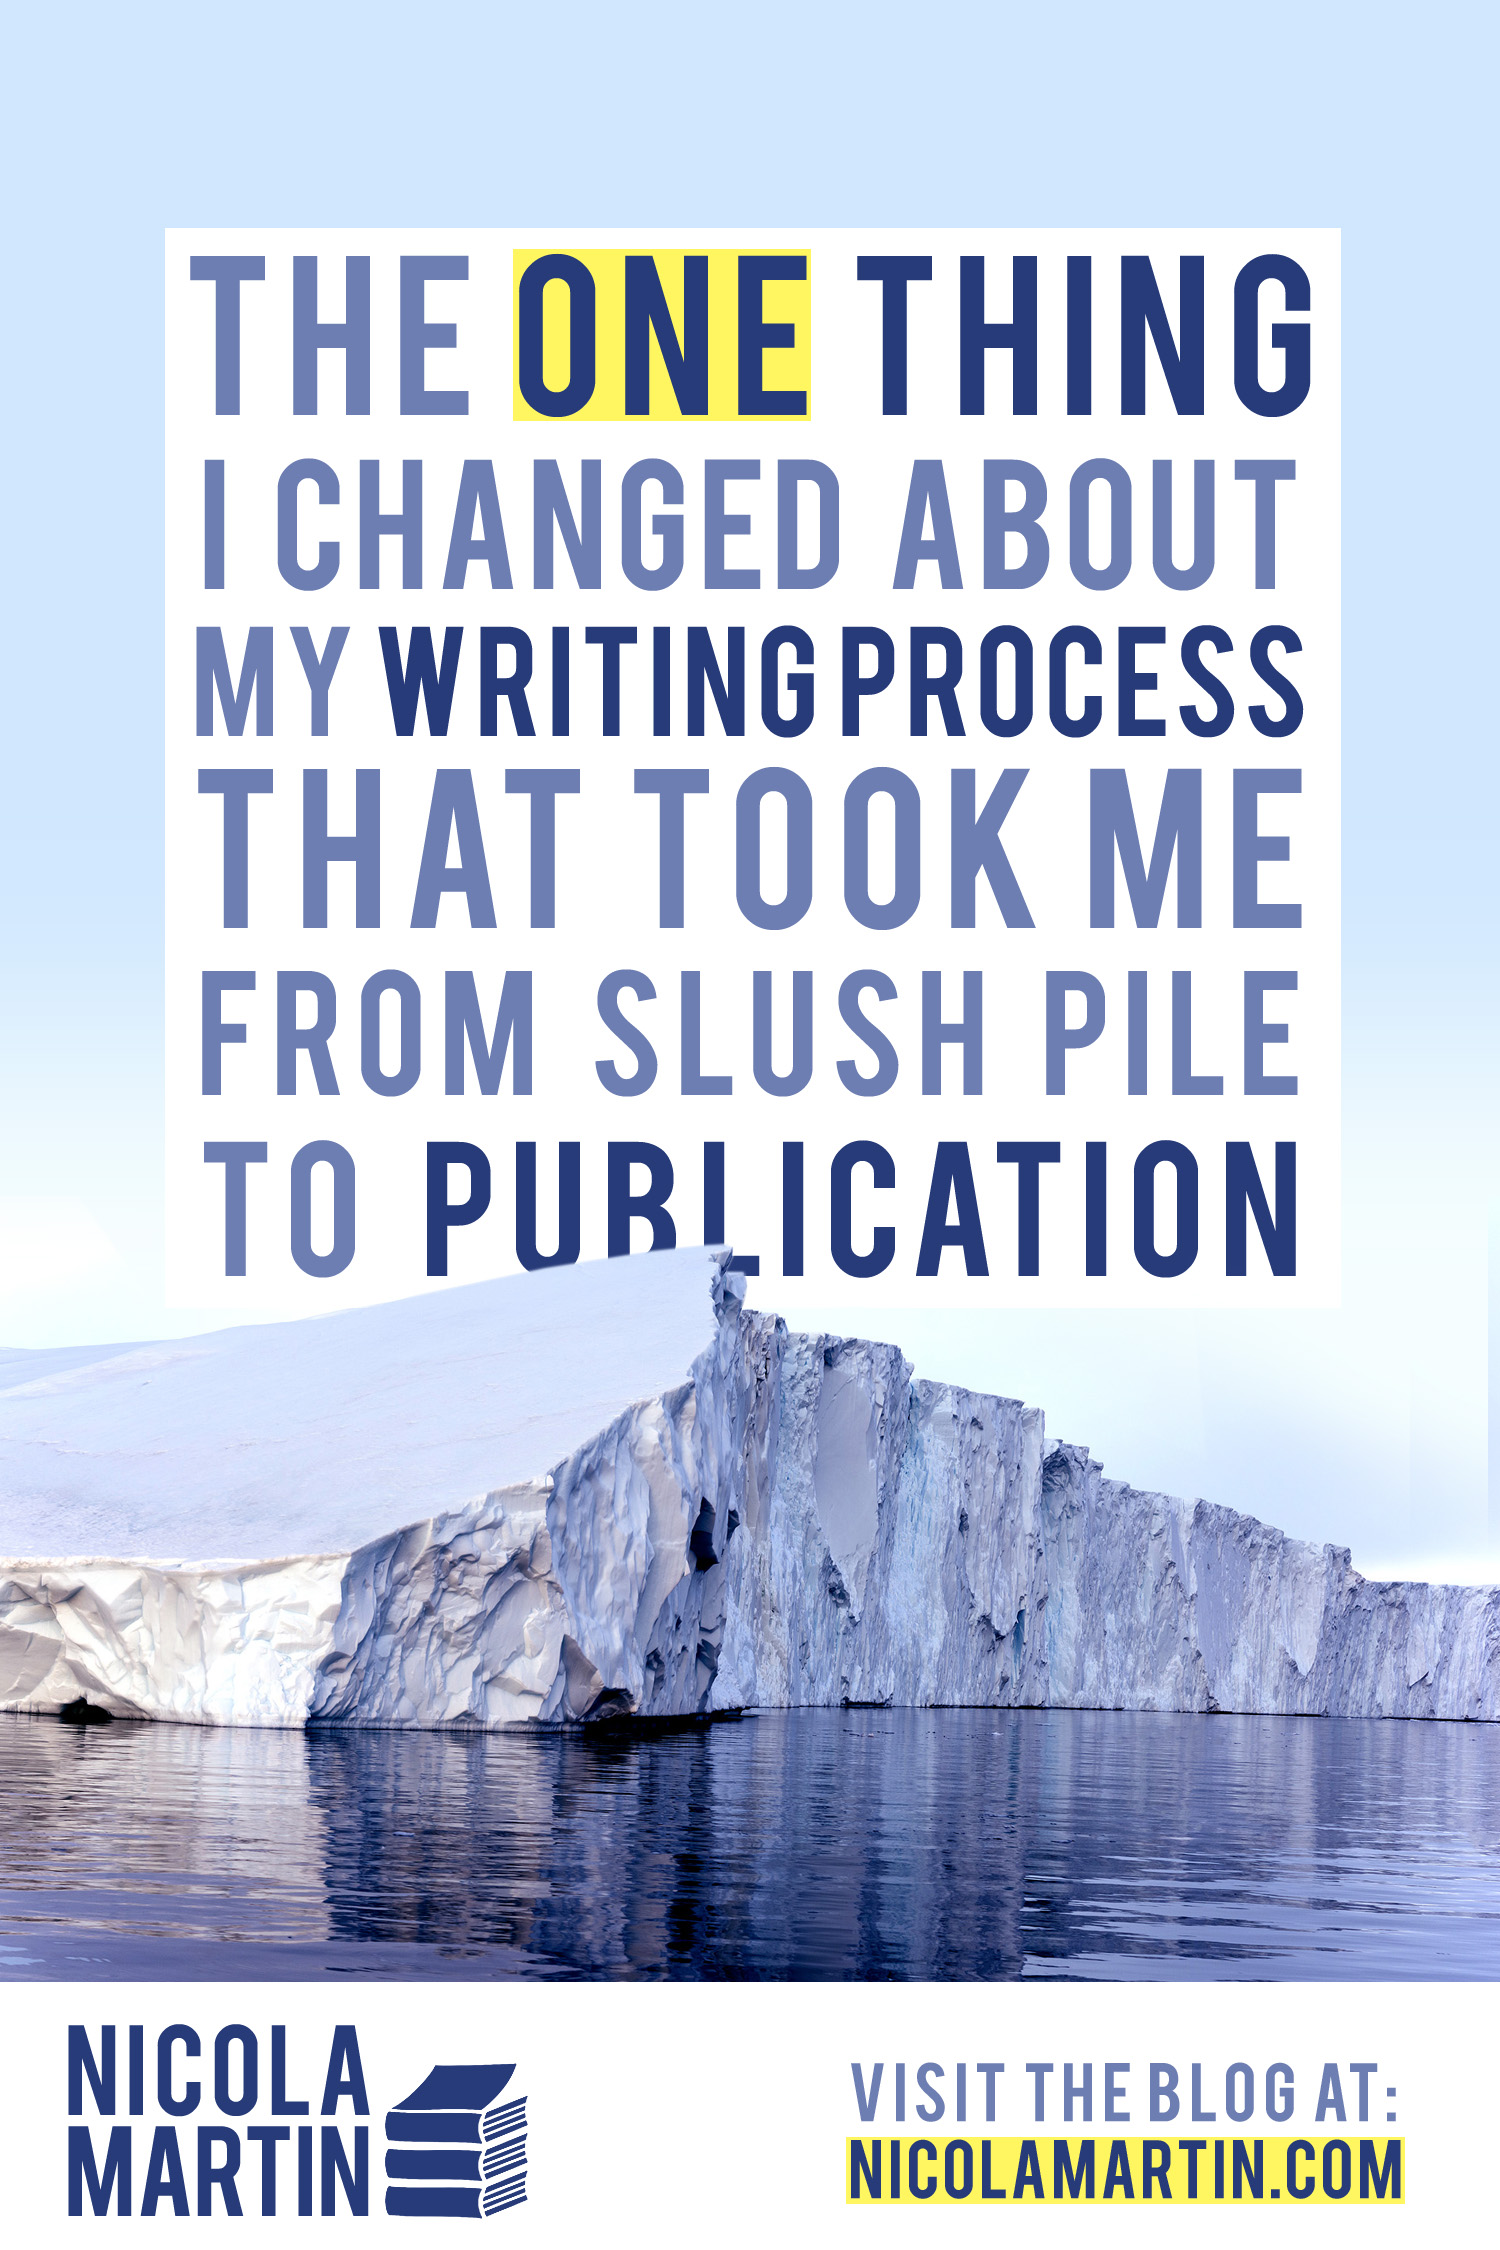 The one thing I changed about my writing process